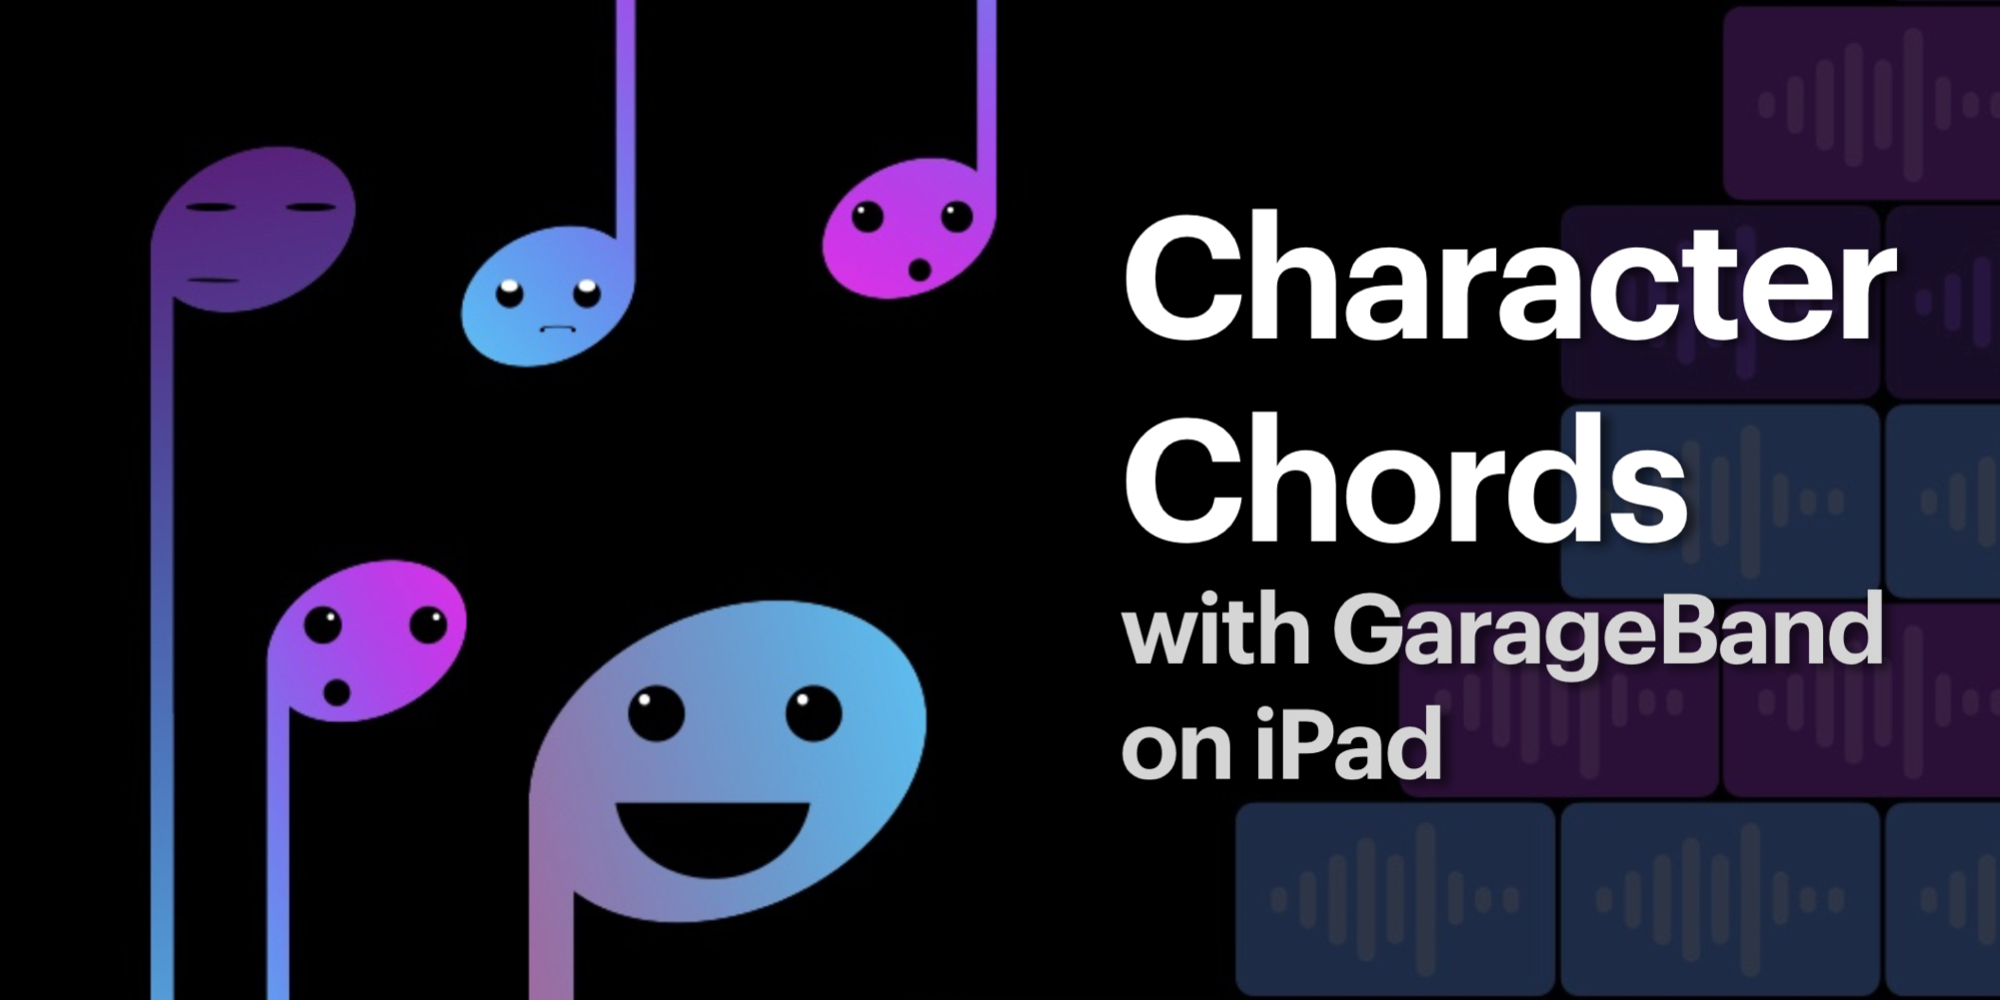 Character Chords with GarageBand on iPad by Eoin Hughes. 